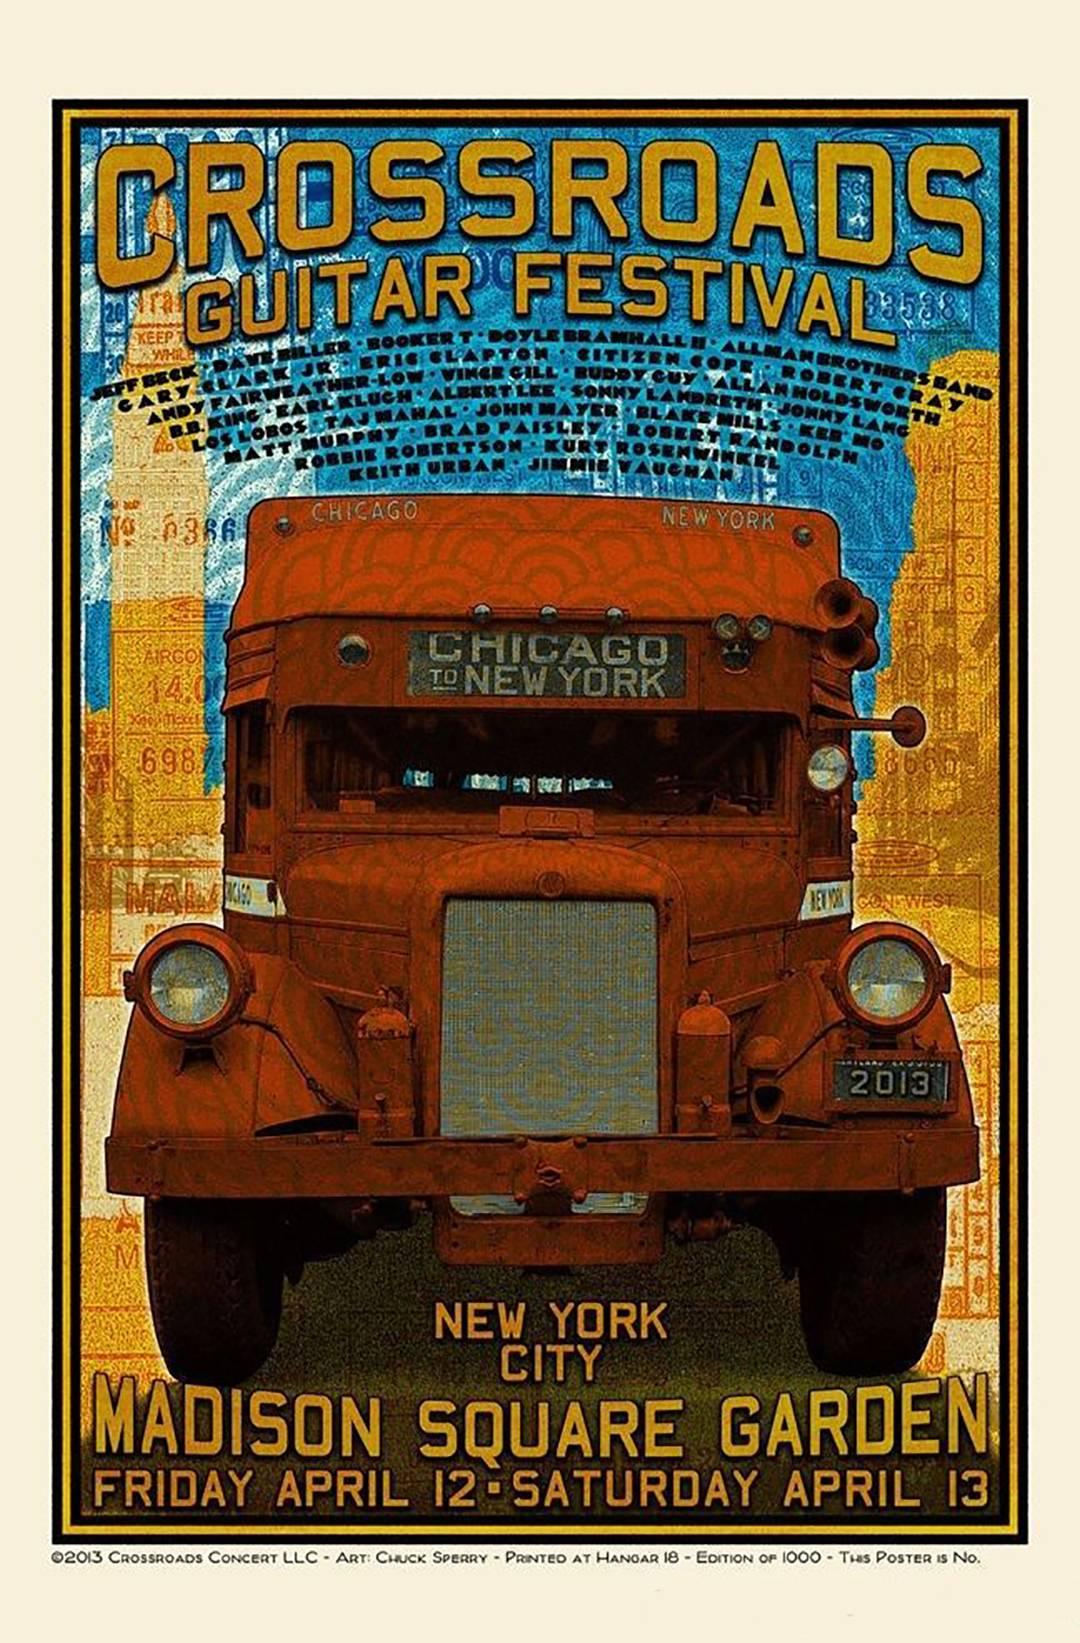 Very rare original limited edition official concert poster  2013 Crossroads Guitar Festival  1st edition hand numbered x/1000  Hand Signed and Numbered by the Artist – Chuck Sperry  Date: 2013  Measures 22″ x 32″  Excellent Mint Condition.

Title: